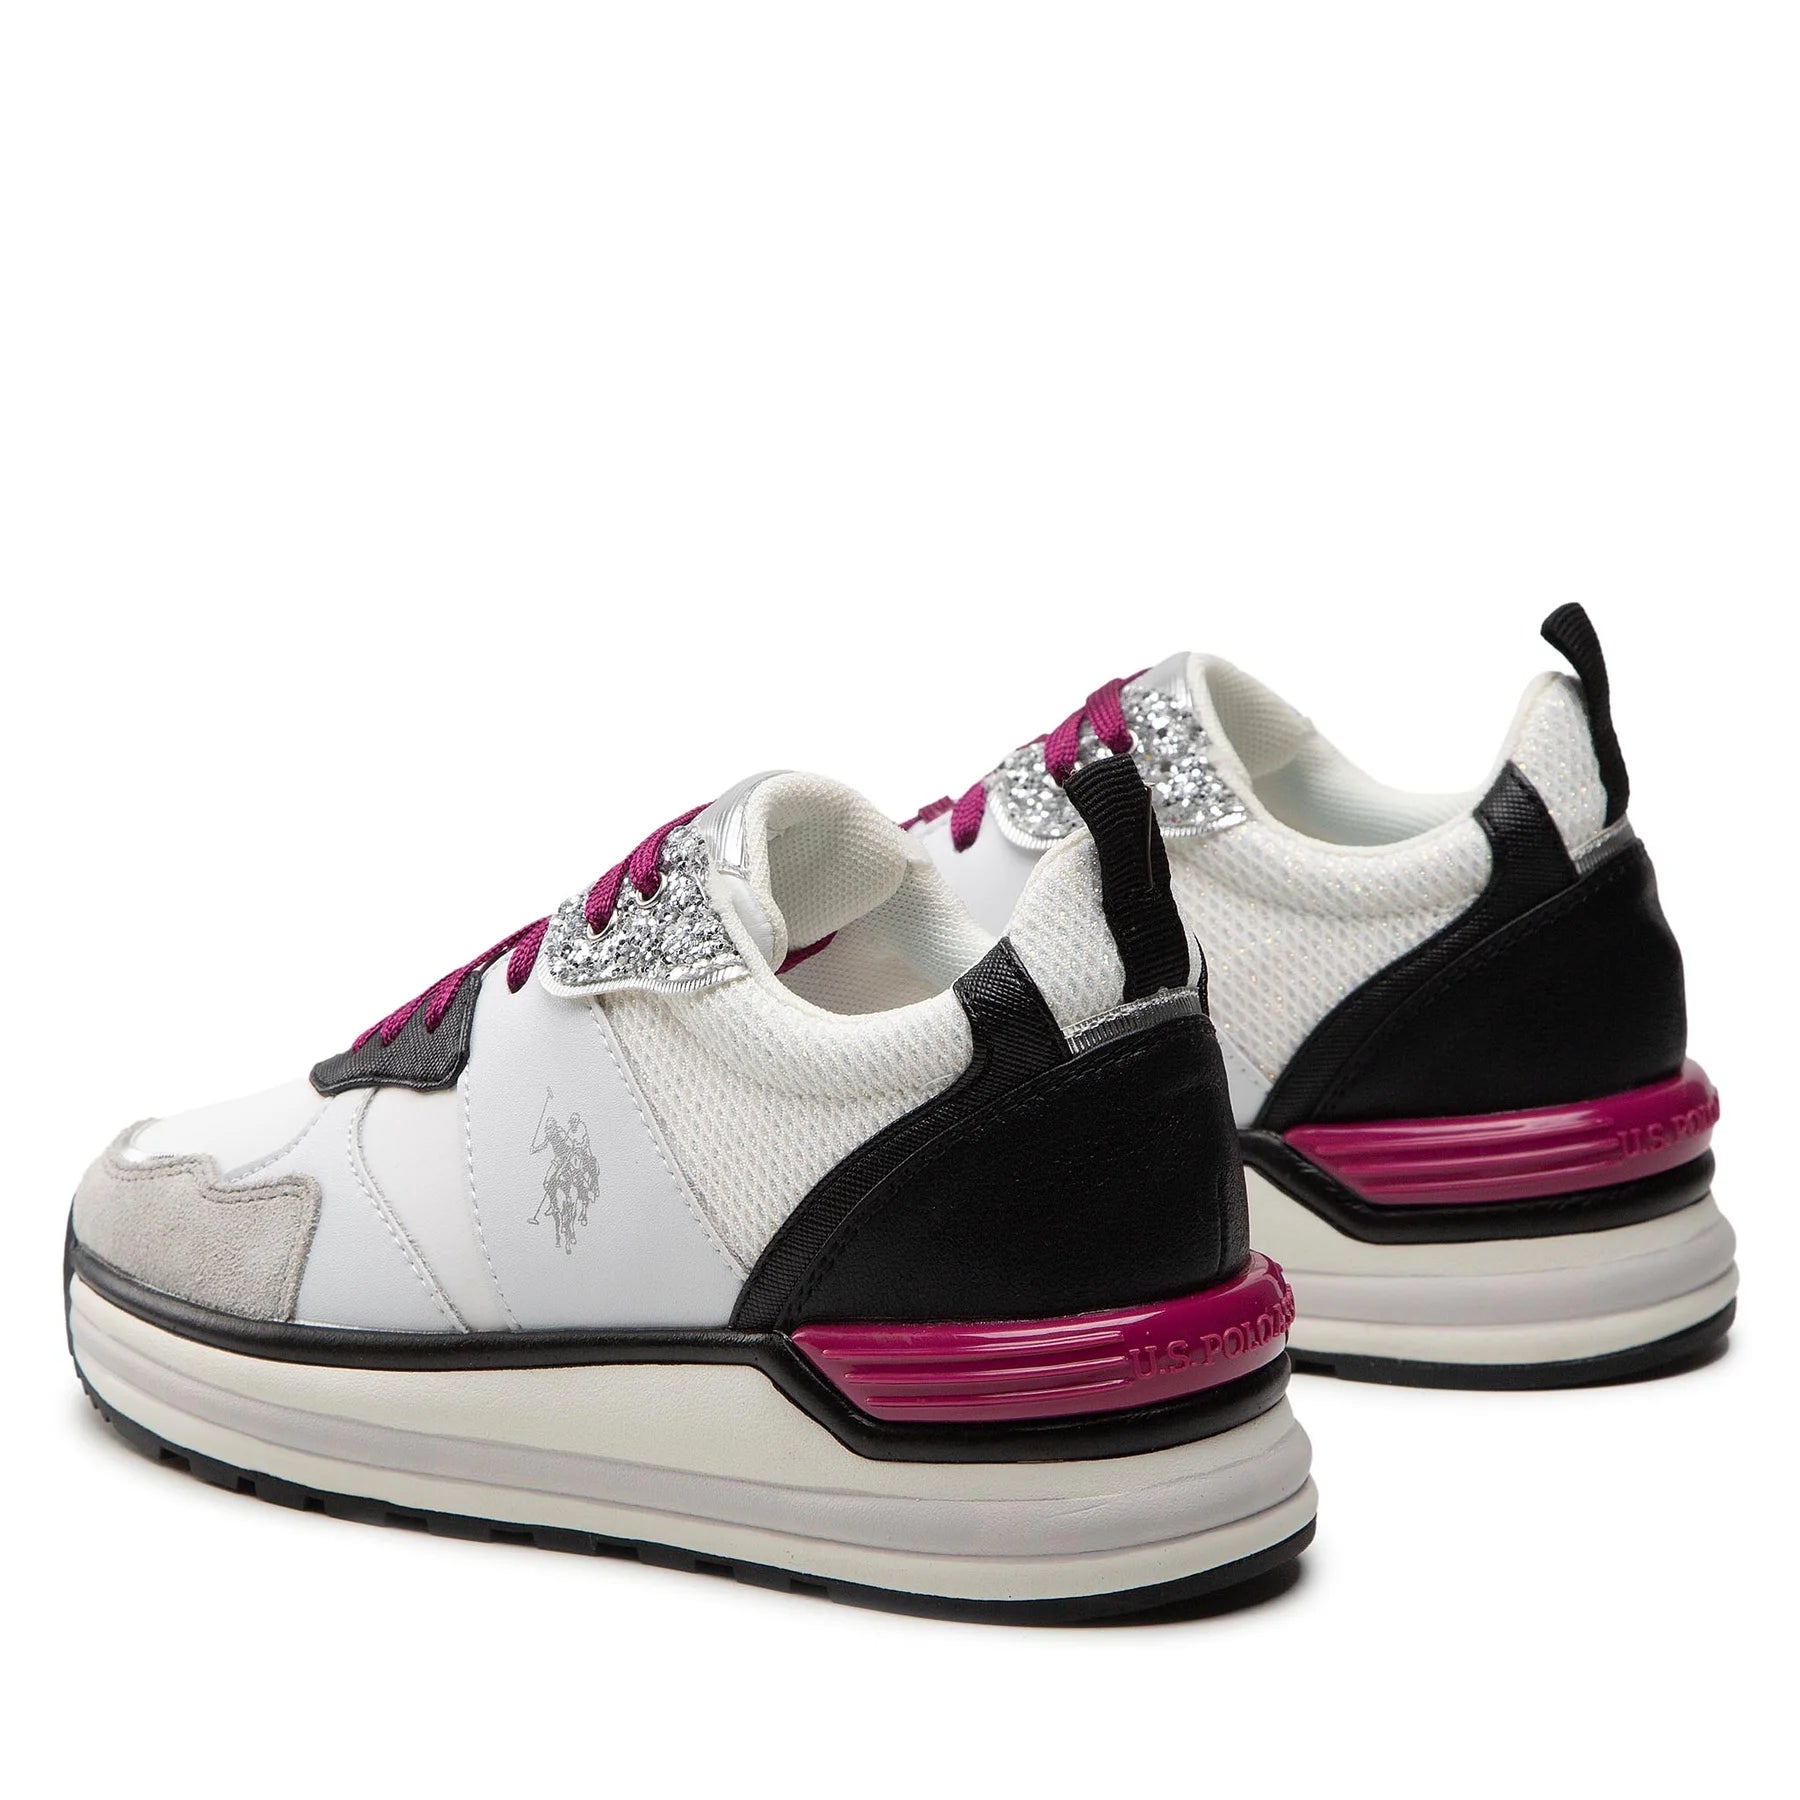 Sneakers OPHRA006-WHI-BLK01- U.S. POLO ASSN.